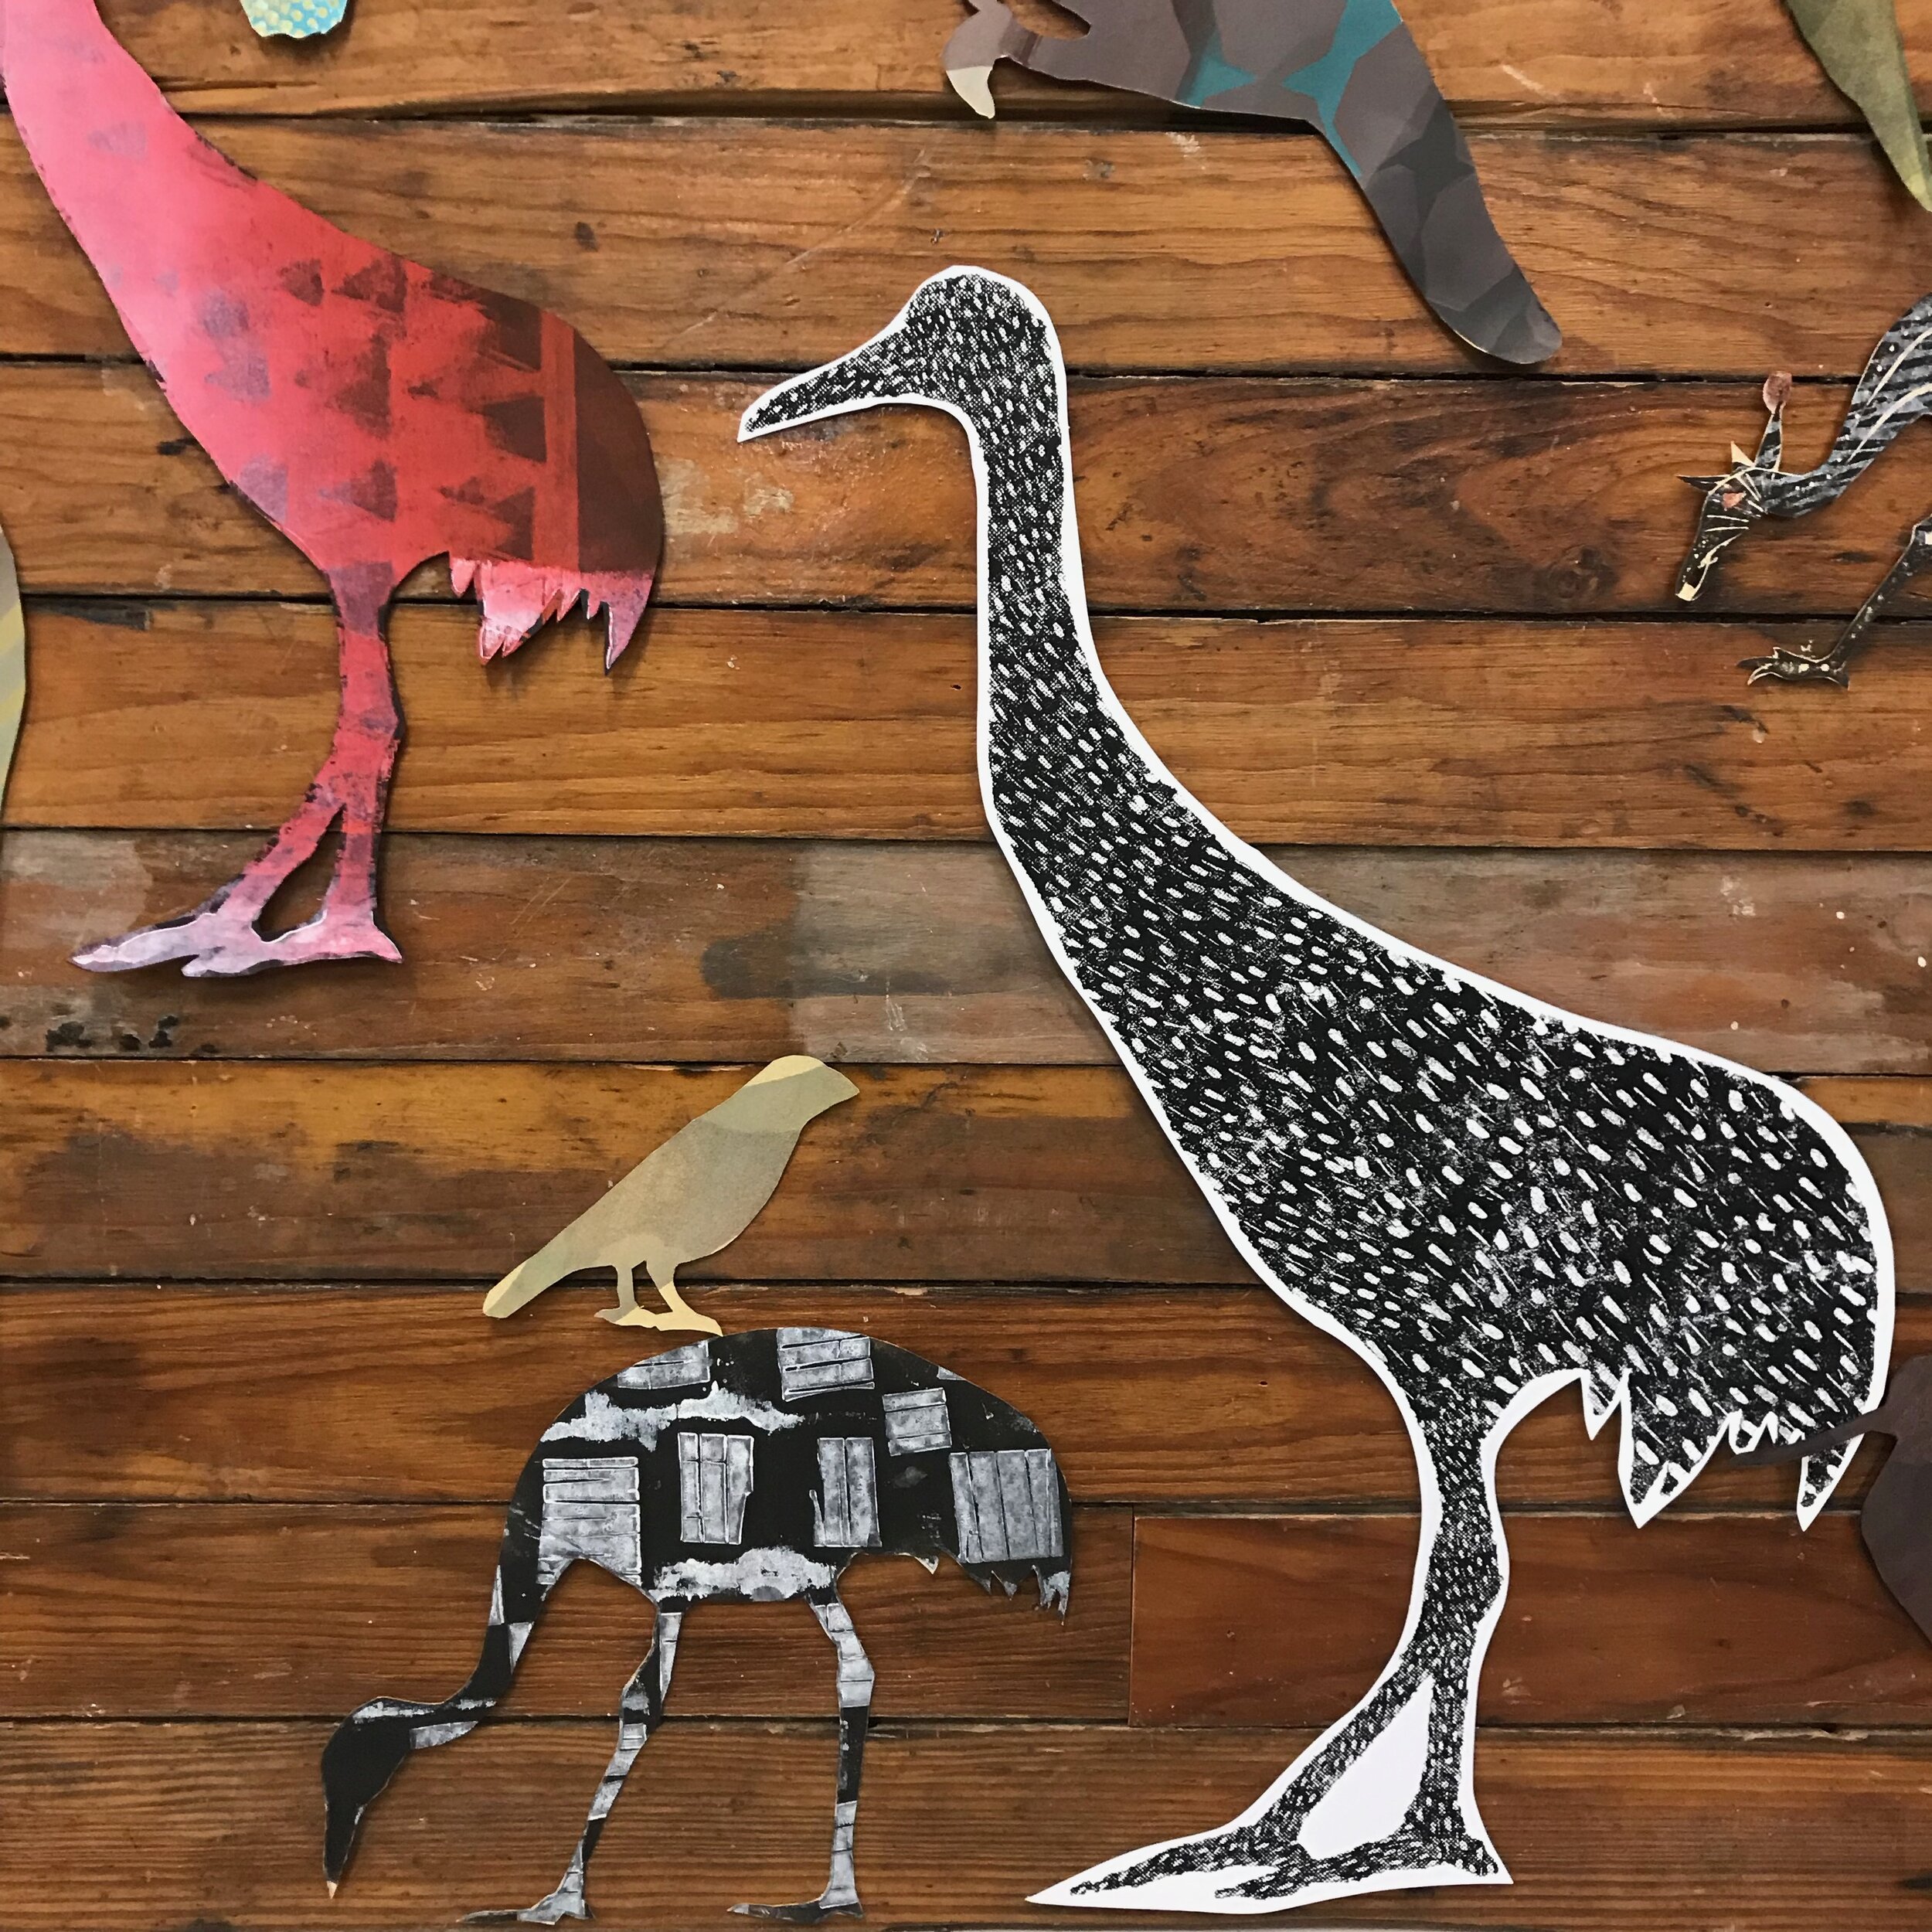 FLOCK at Central Print, St. Louis, MO August 2019